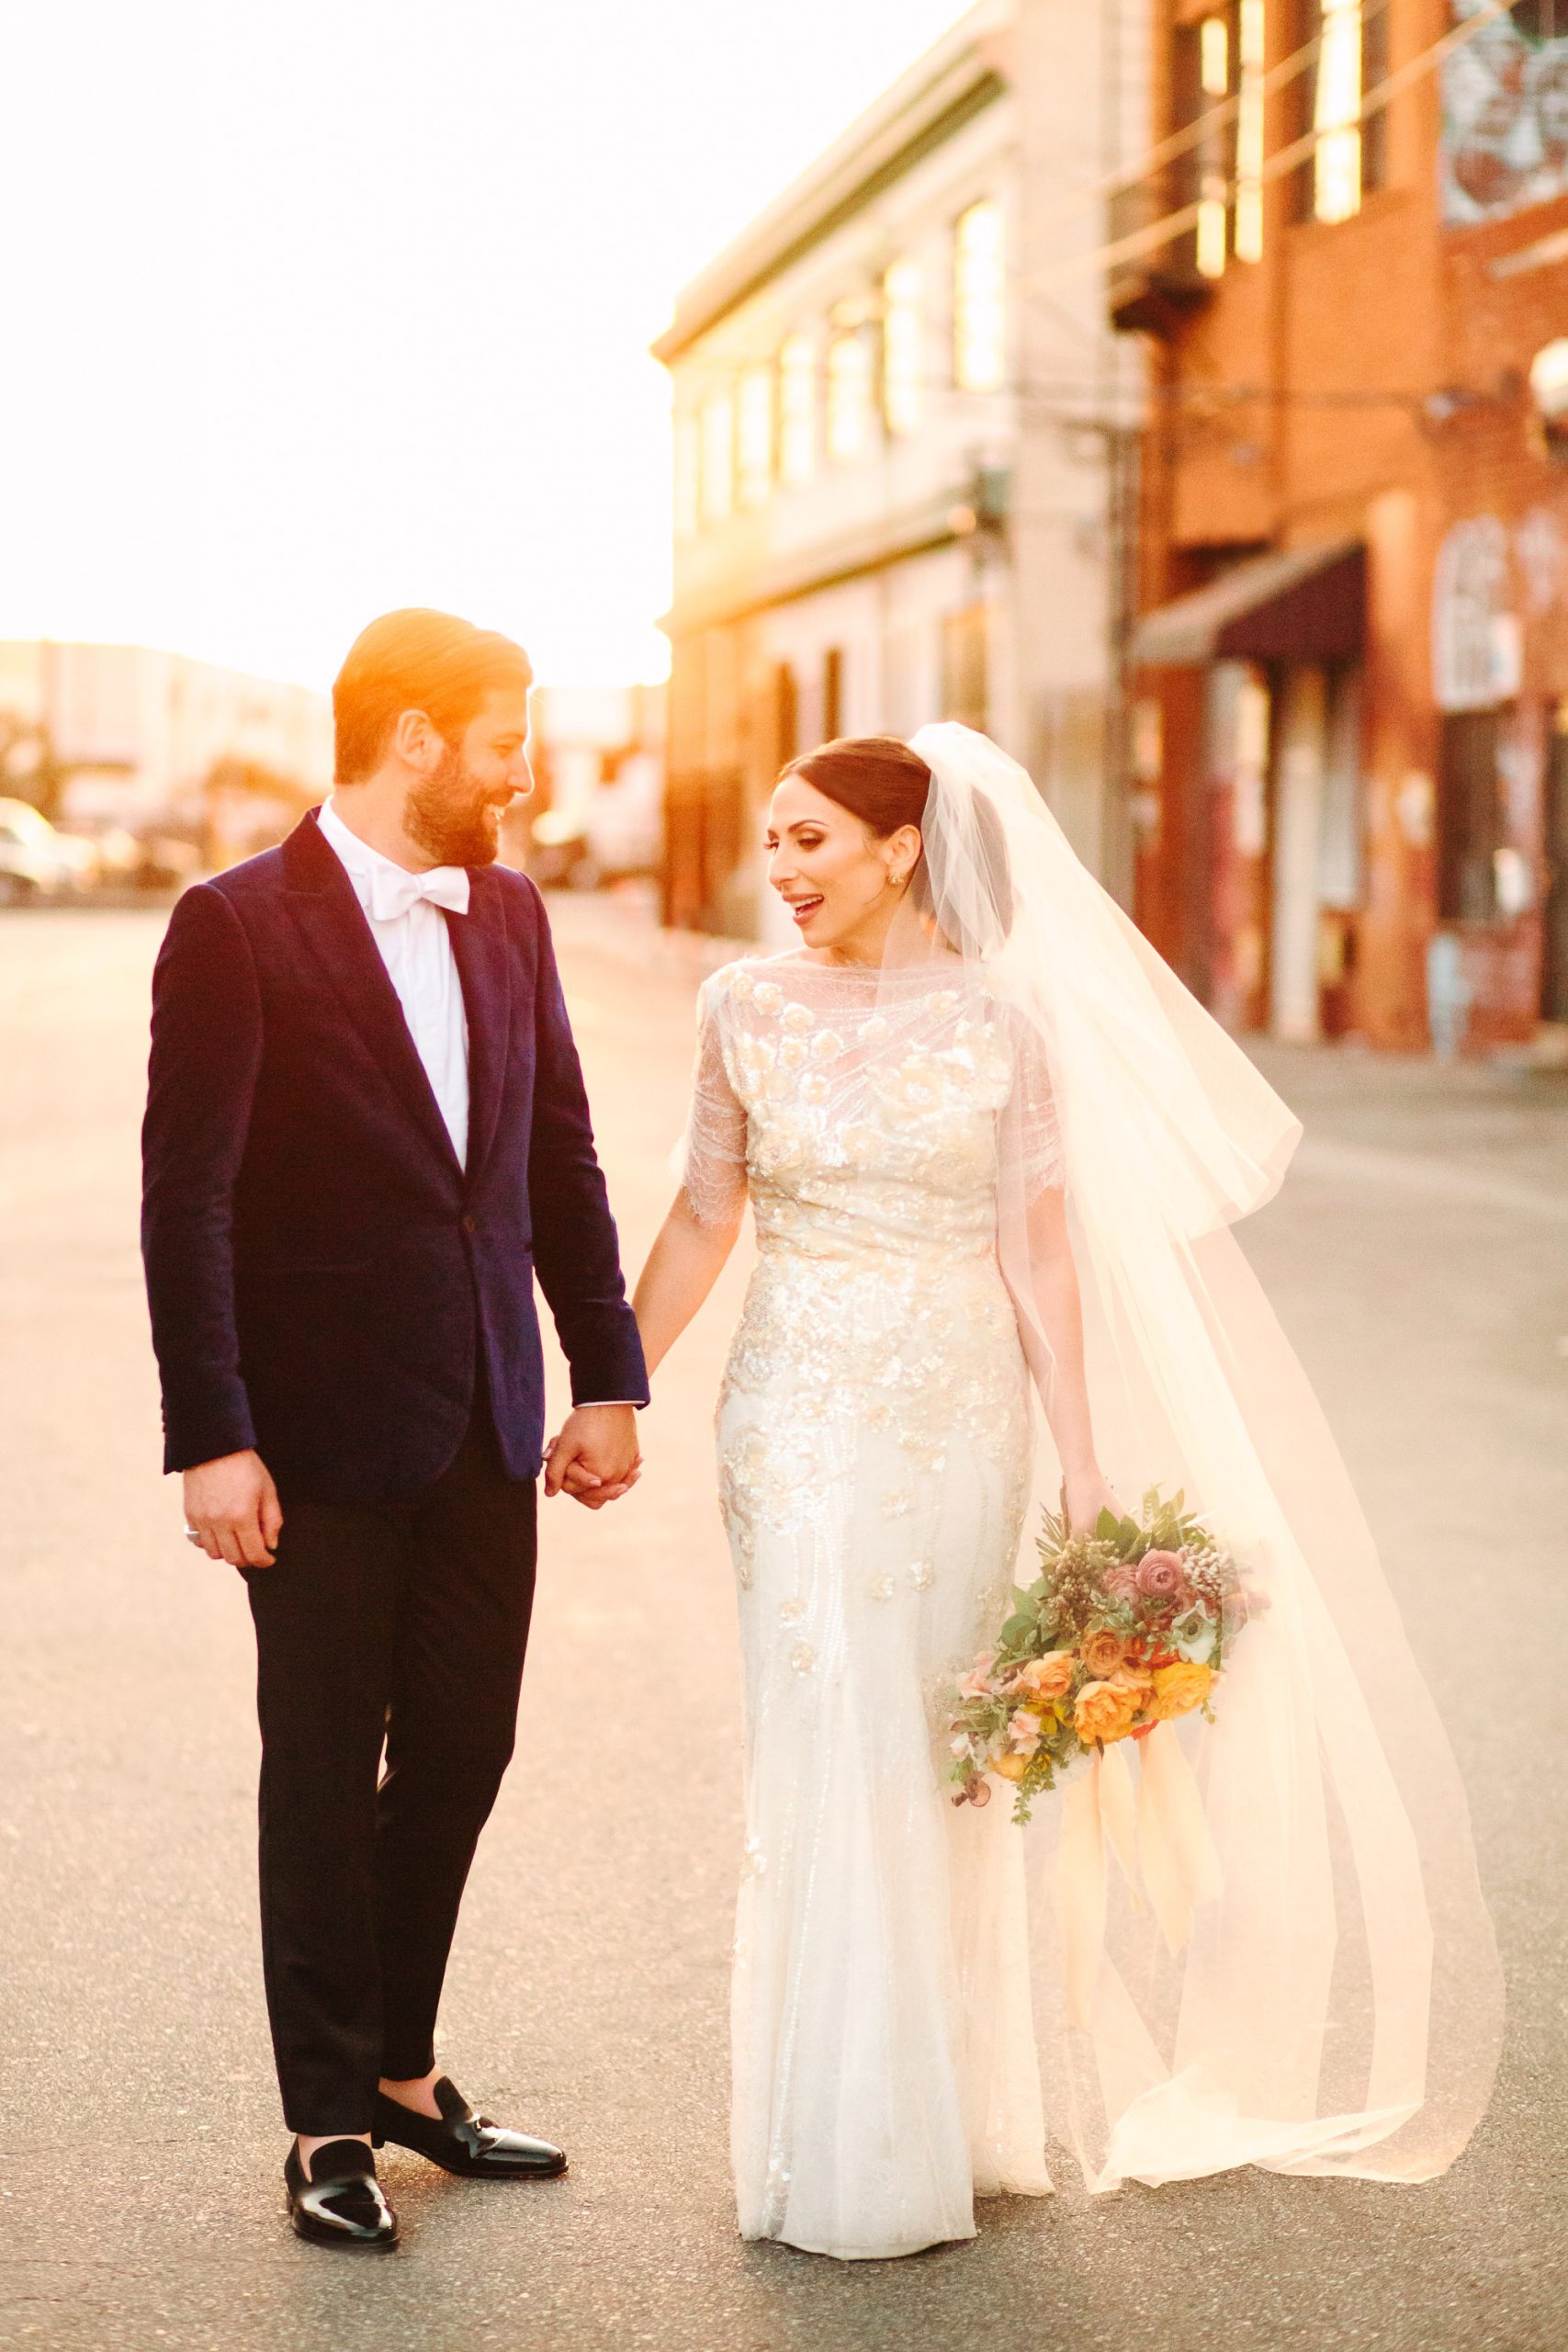 Wedding portrait during sunset by Mary Costa Photography